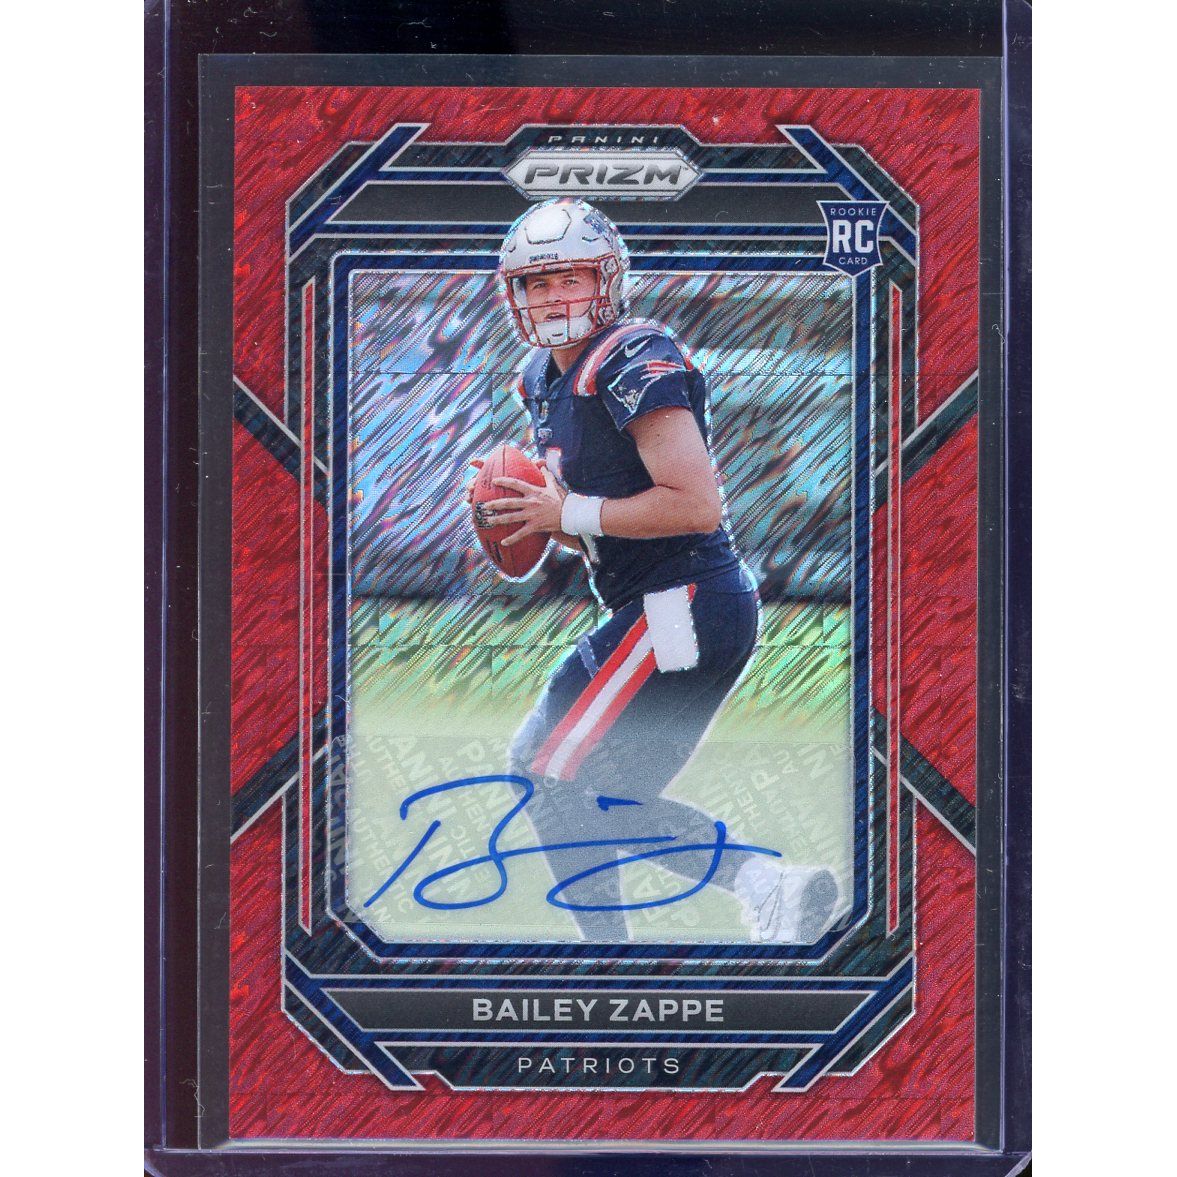 2022 Prizm Bailey Zappe Red Shimmer Auto #305 /35 RC